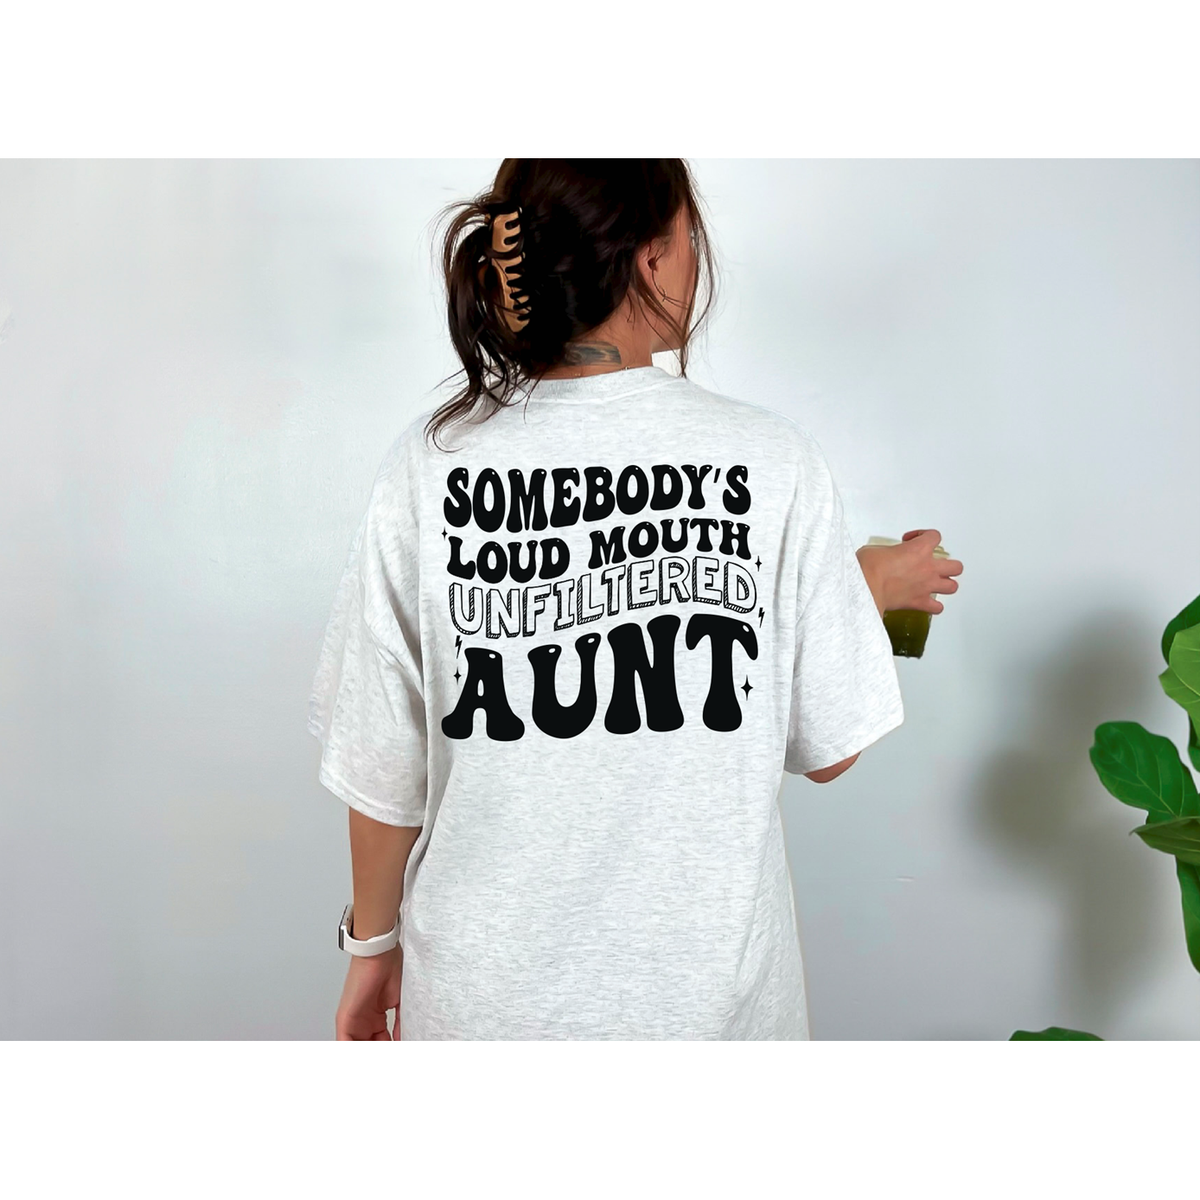 Solid Loud Mouth Unfiltered Aunt Tee or sweatshirt